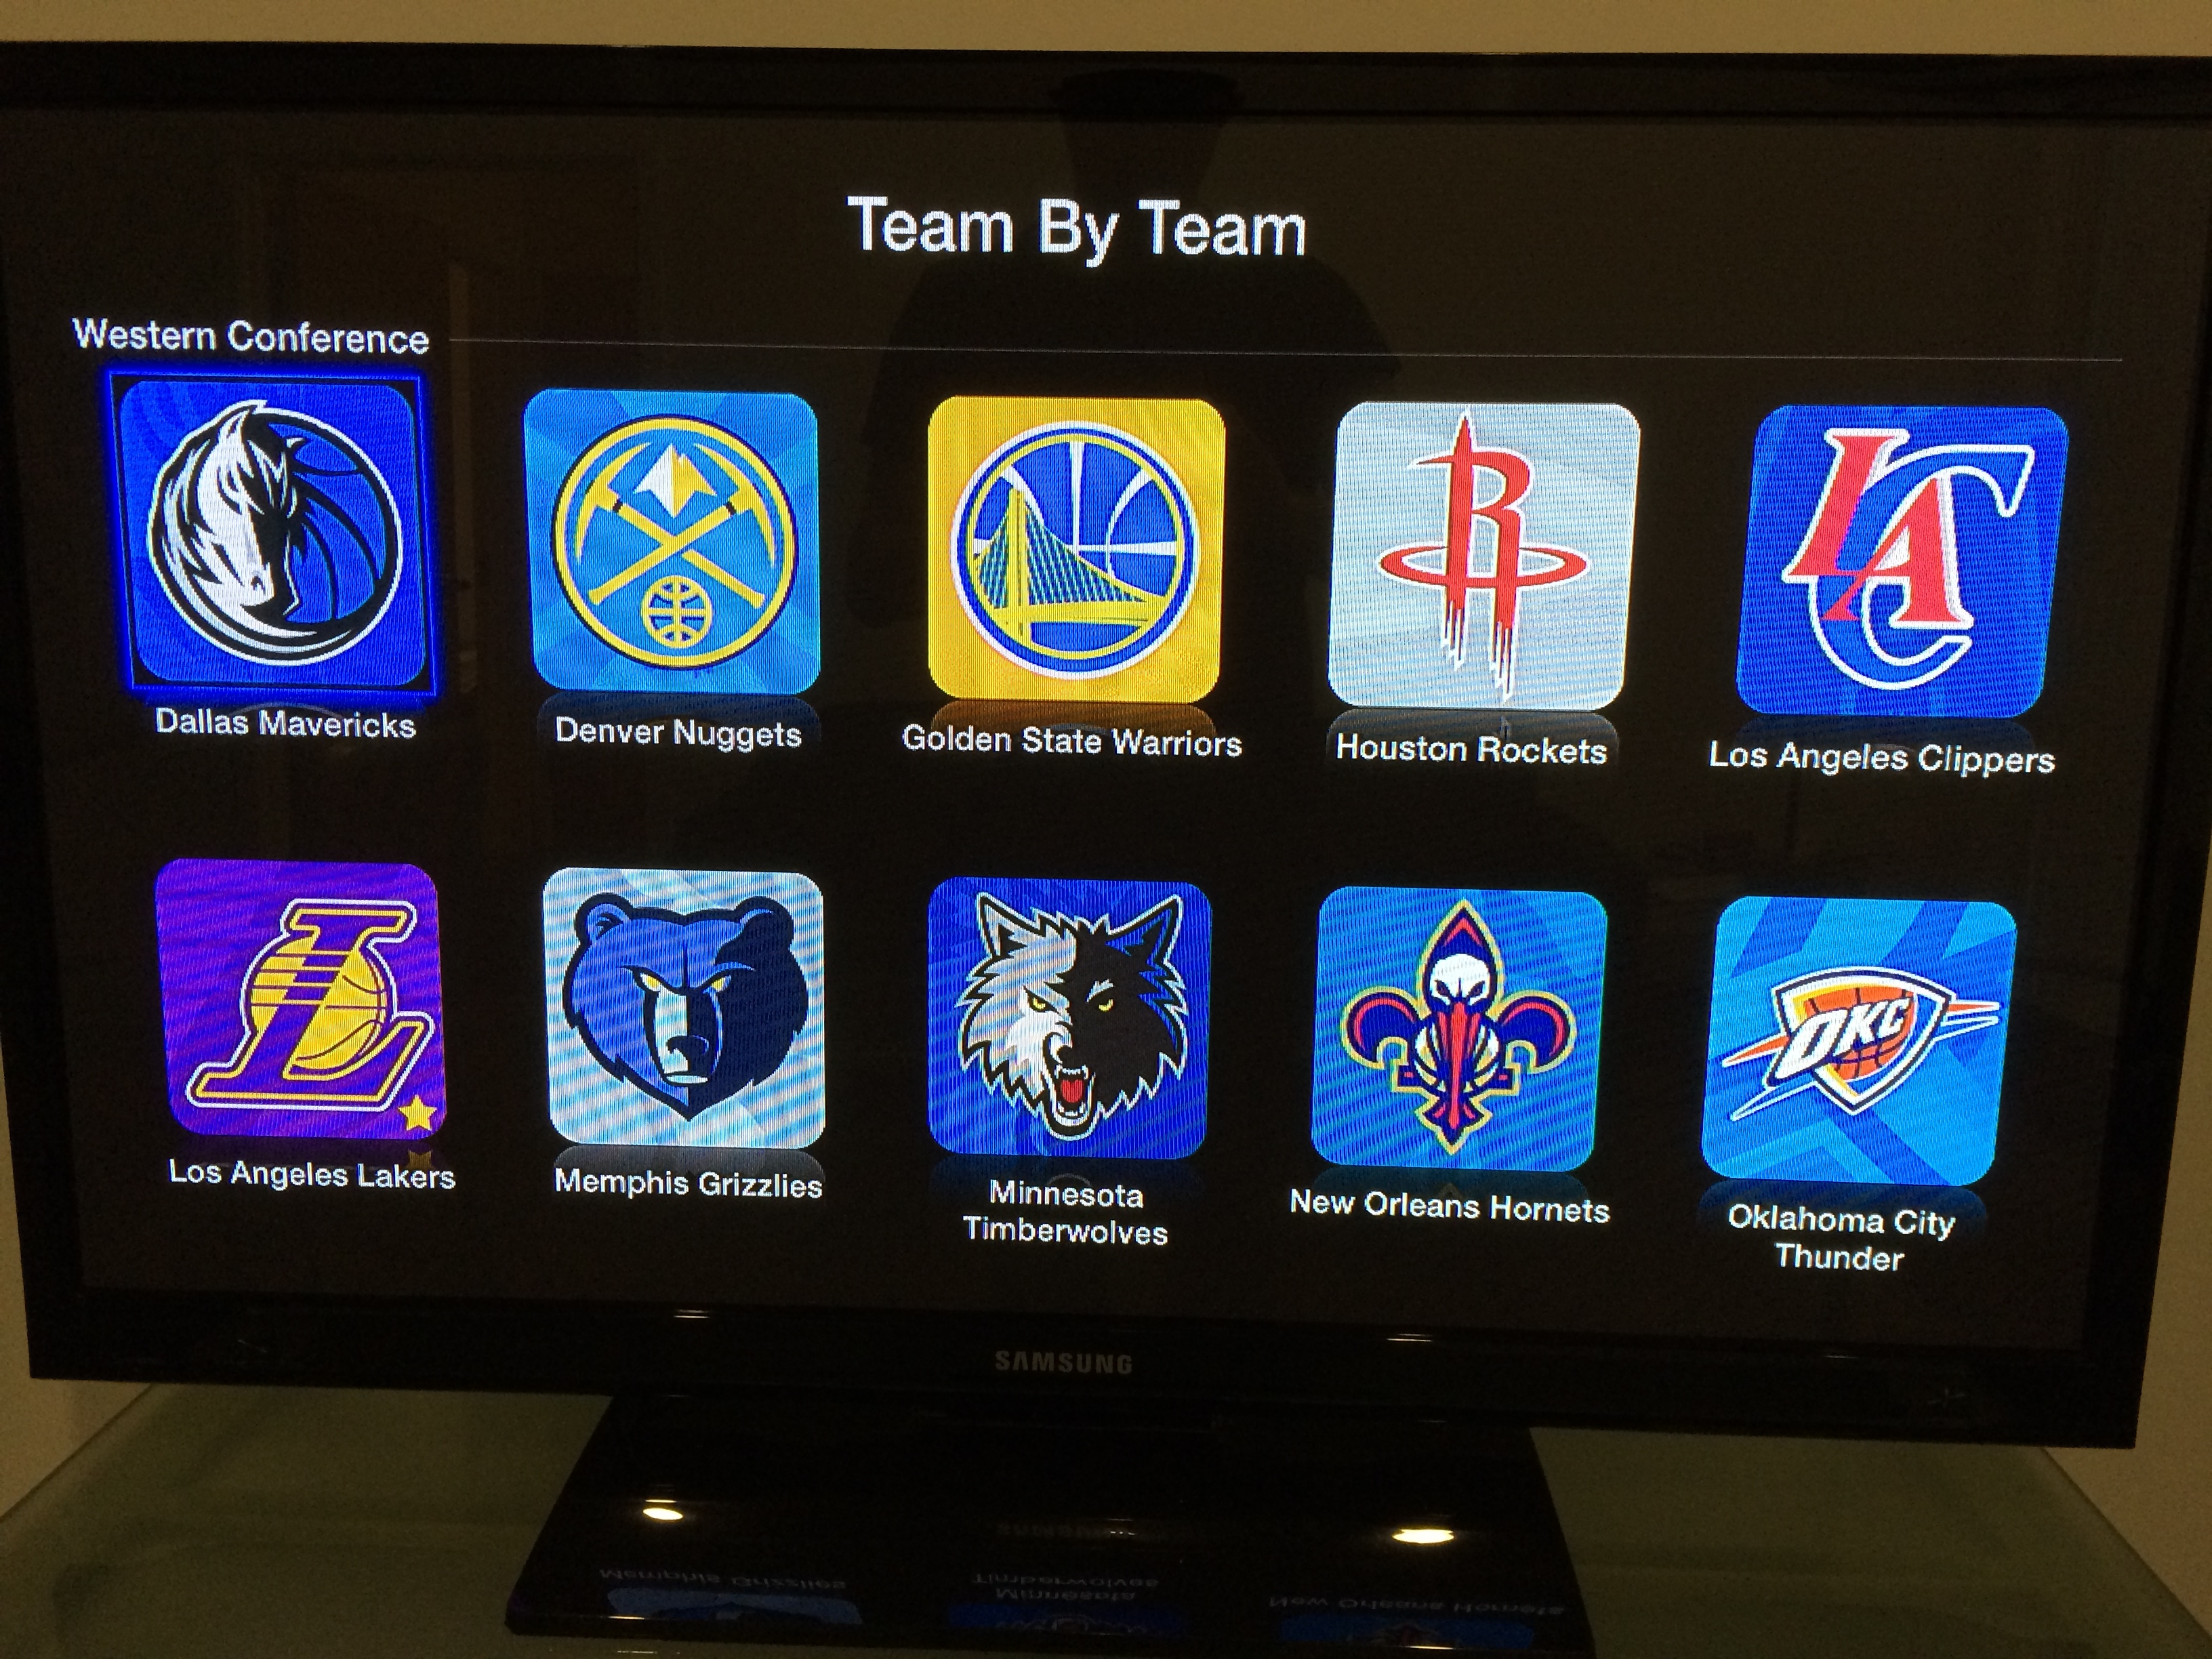 Apple TV League app updated for new season - 9to5Mac